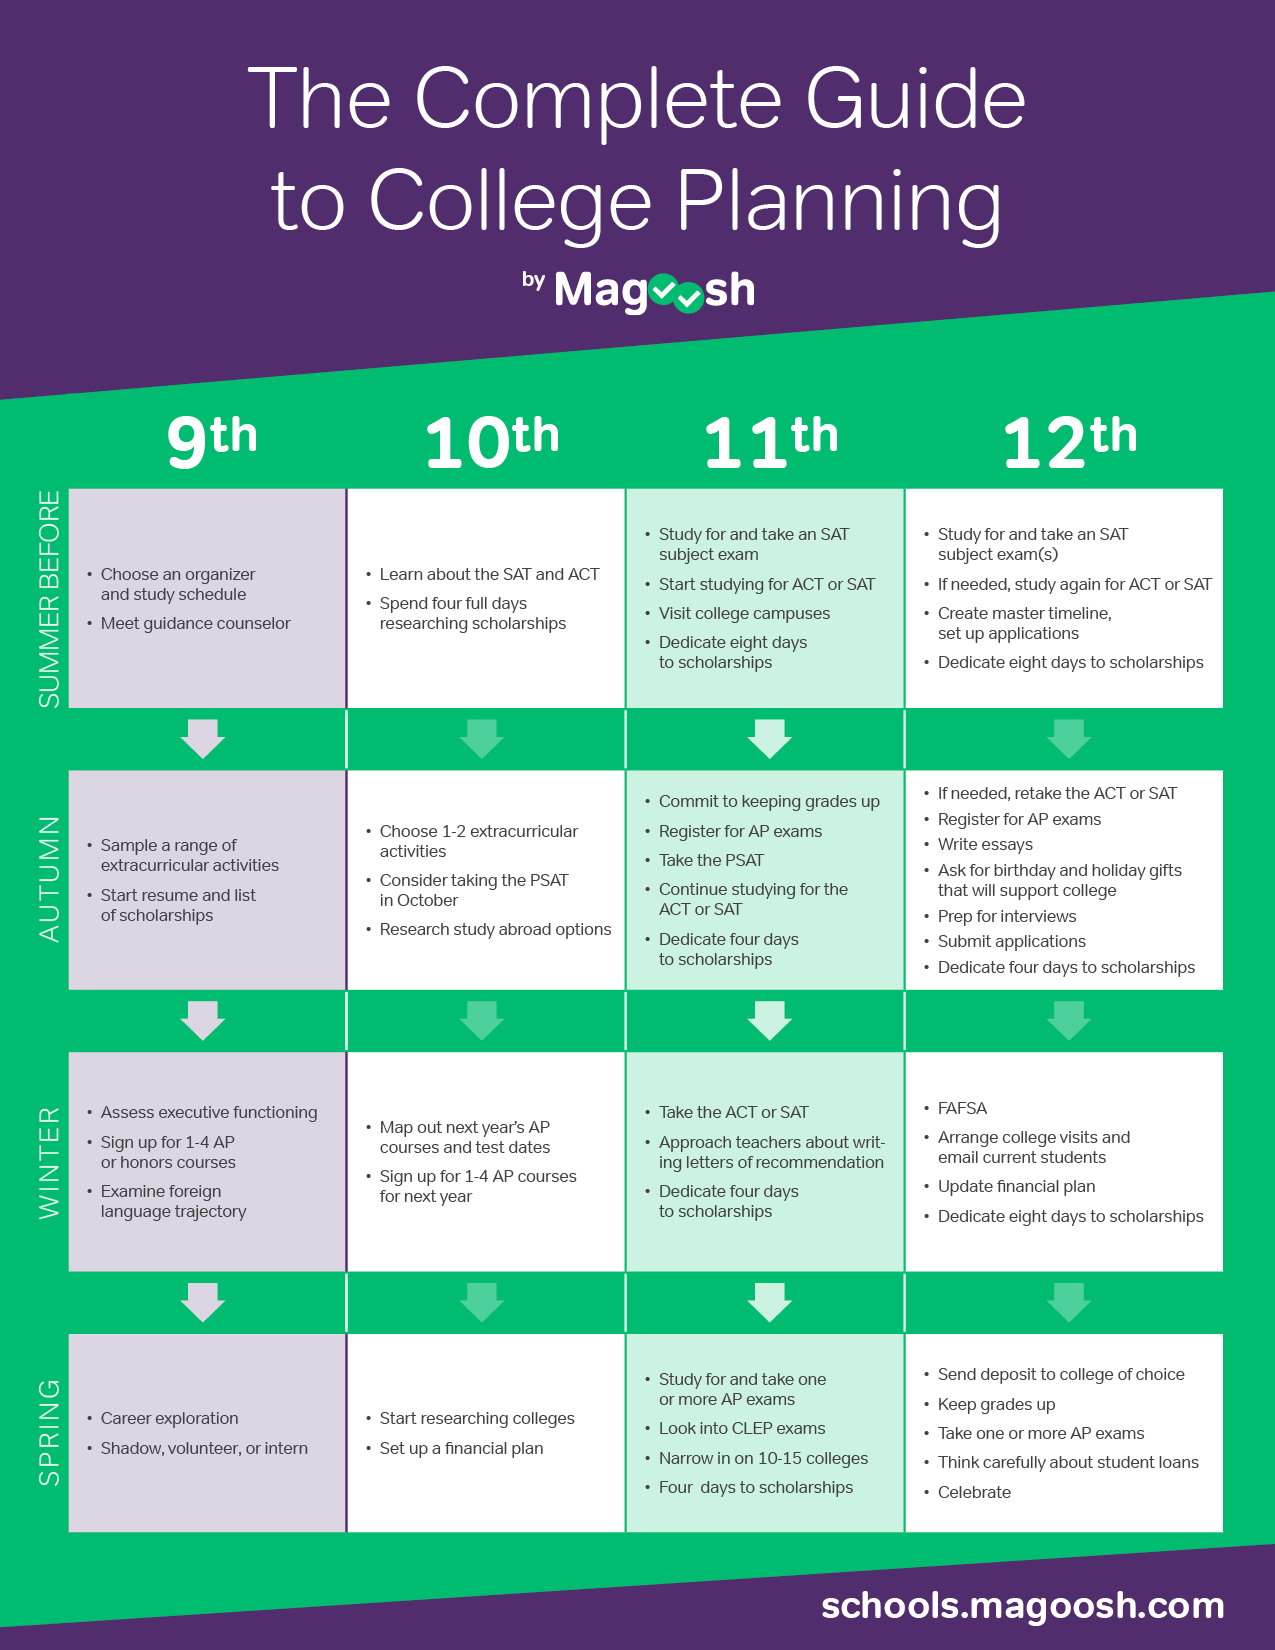 The Complete Guide To College Admissions